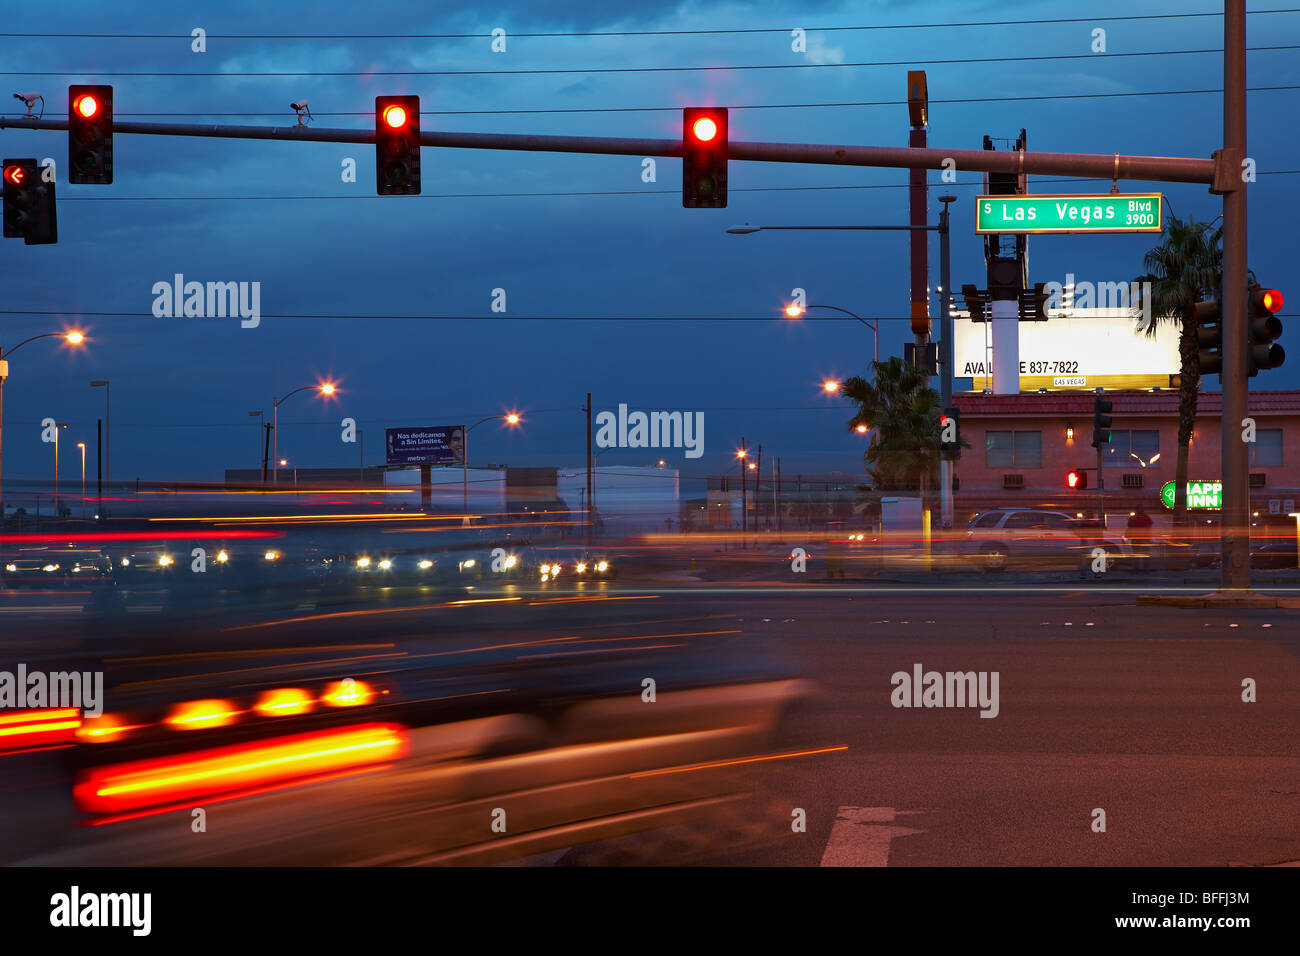 The Strip - Road and blurred cars - Night Scene - Las Vegas Stock Photo